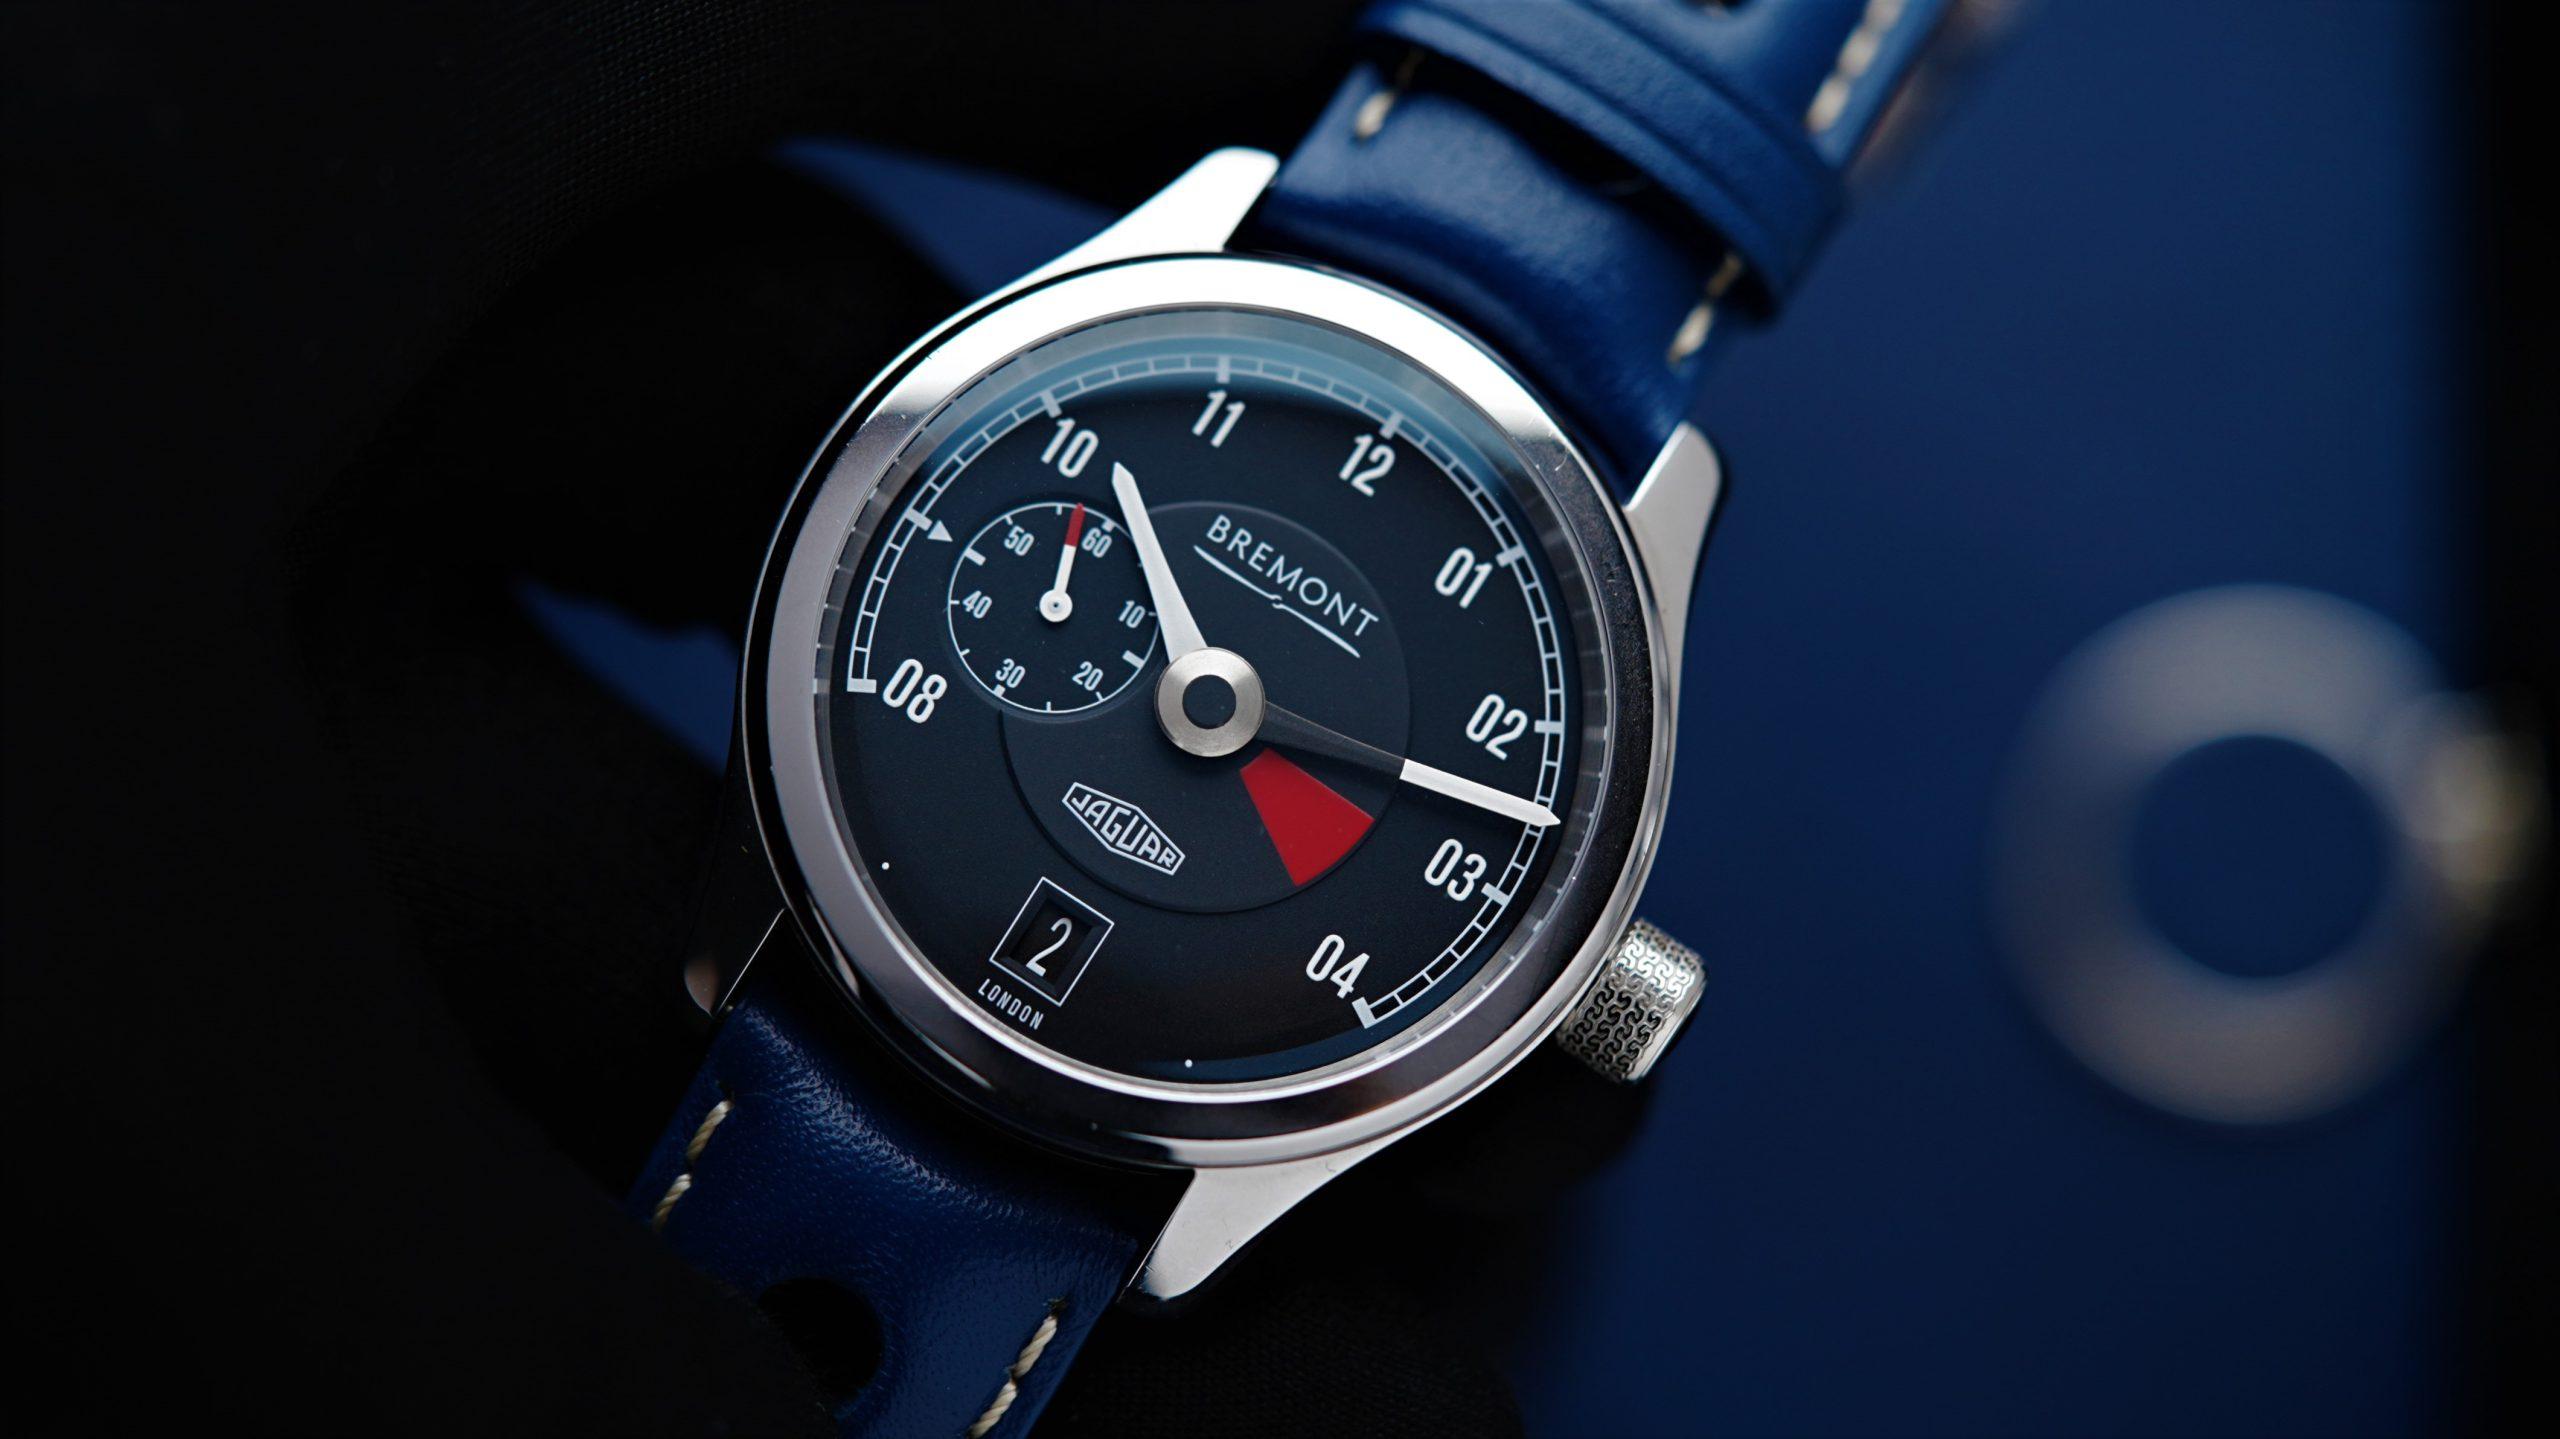 Bremont Jaguar MK1 Blue Dial E Type watch being held in hand.